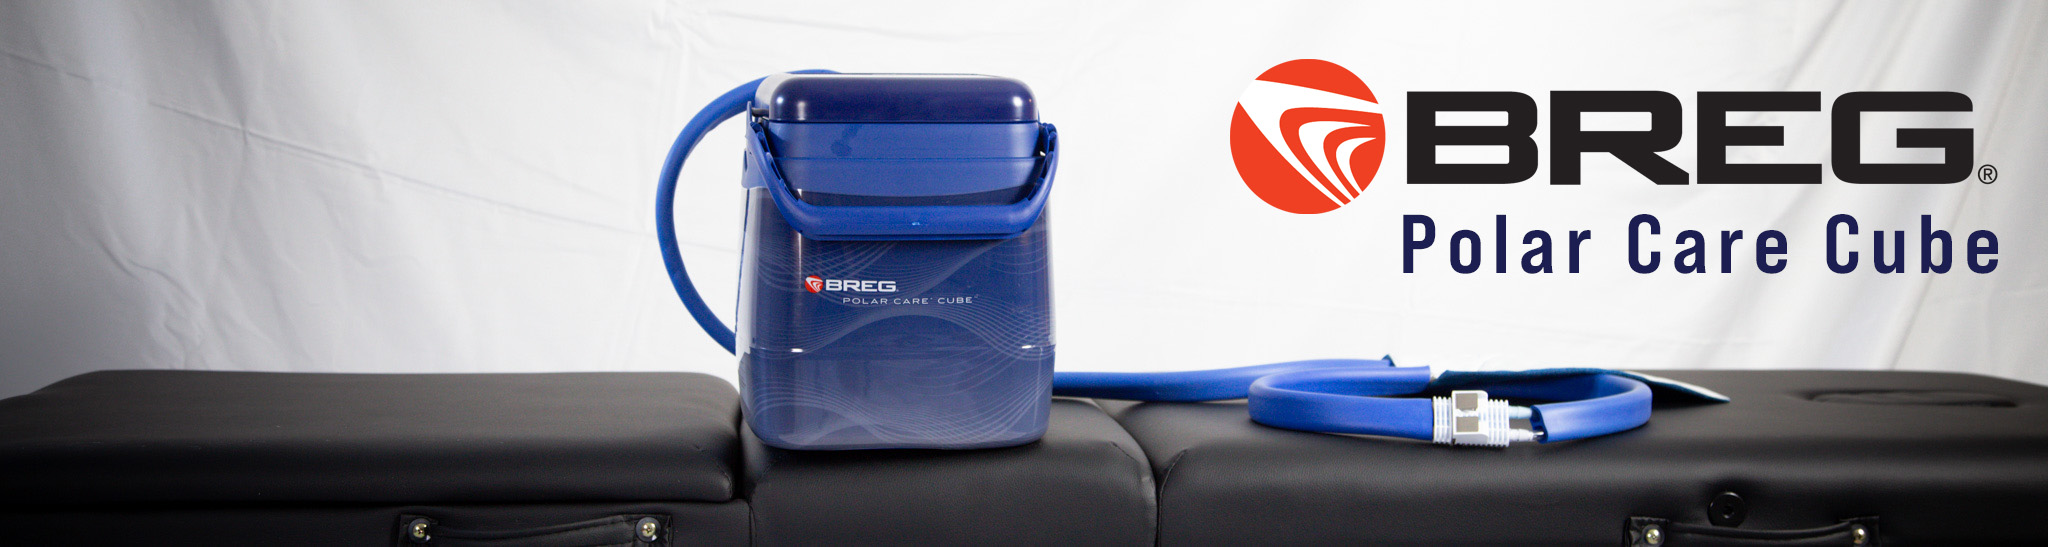 Breg® Polar Care Cube images by Supply Physical Therapy